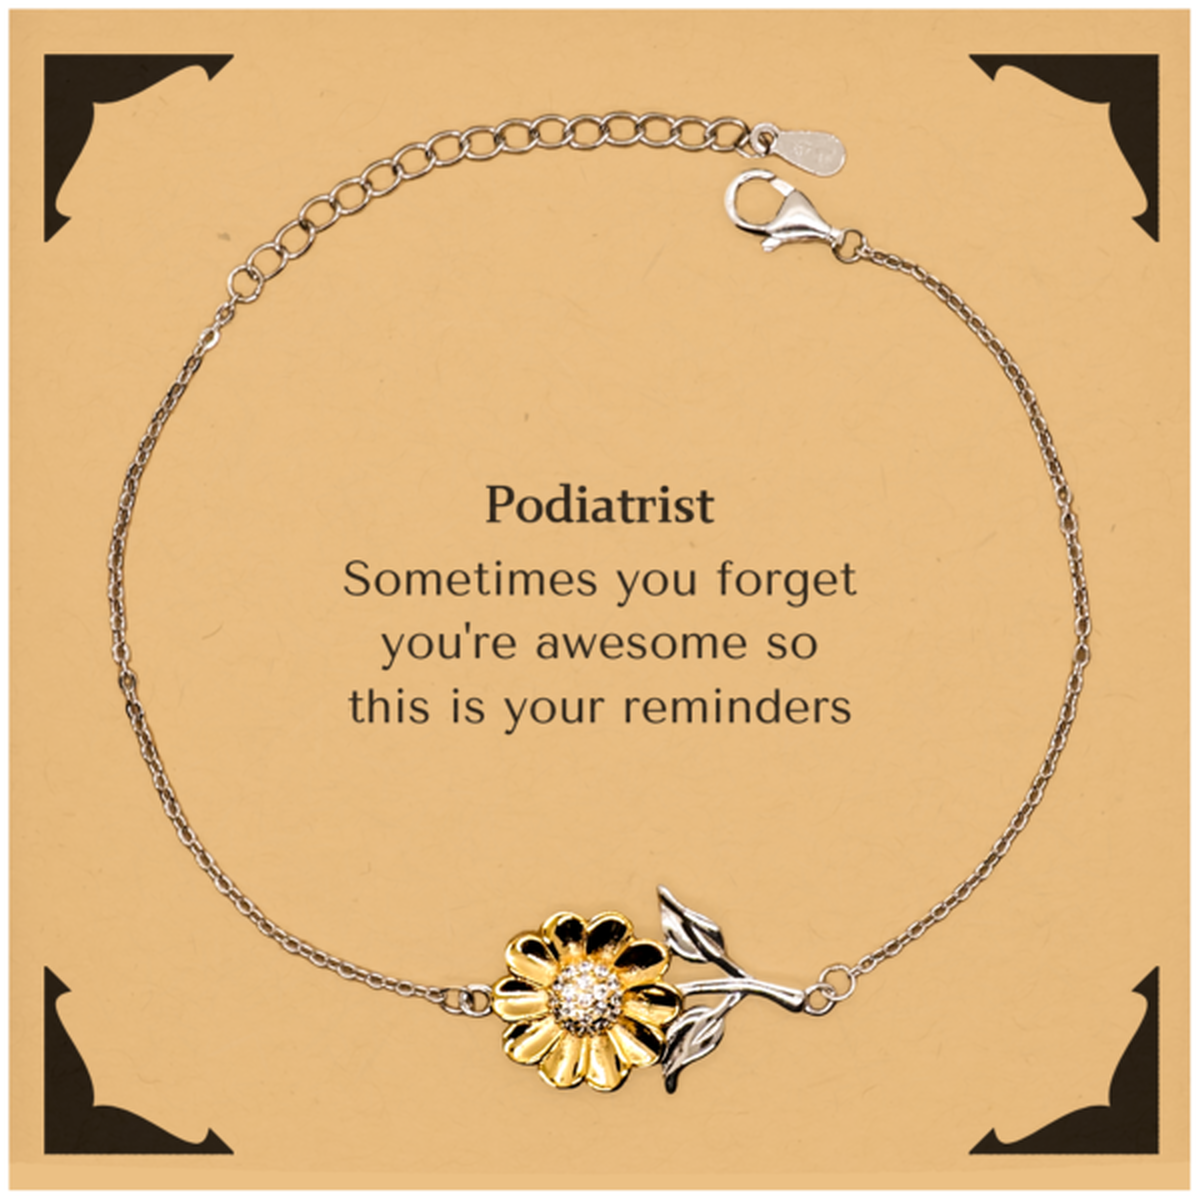 Sentimental Podiatrist Sunflower Bracelet, Podiatrist Sometimes you forget you're awesome so this is your reminders, Graduation Christmas Birthday Gifts for Podiatrist, Men, Women, Coworkers